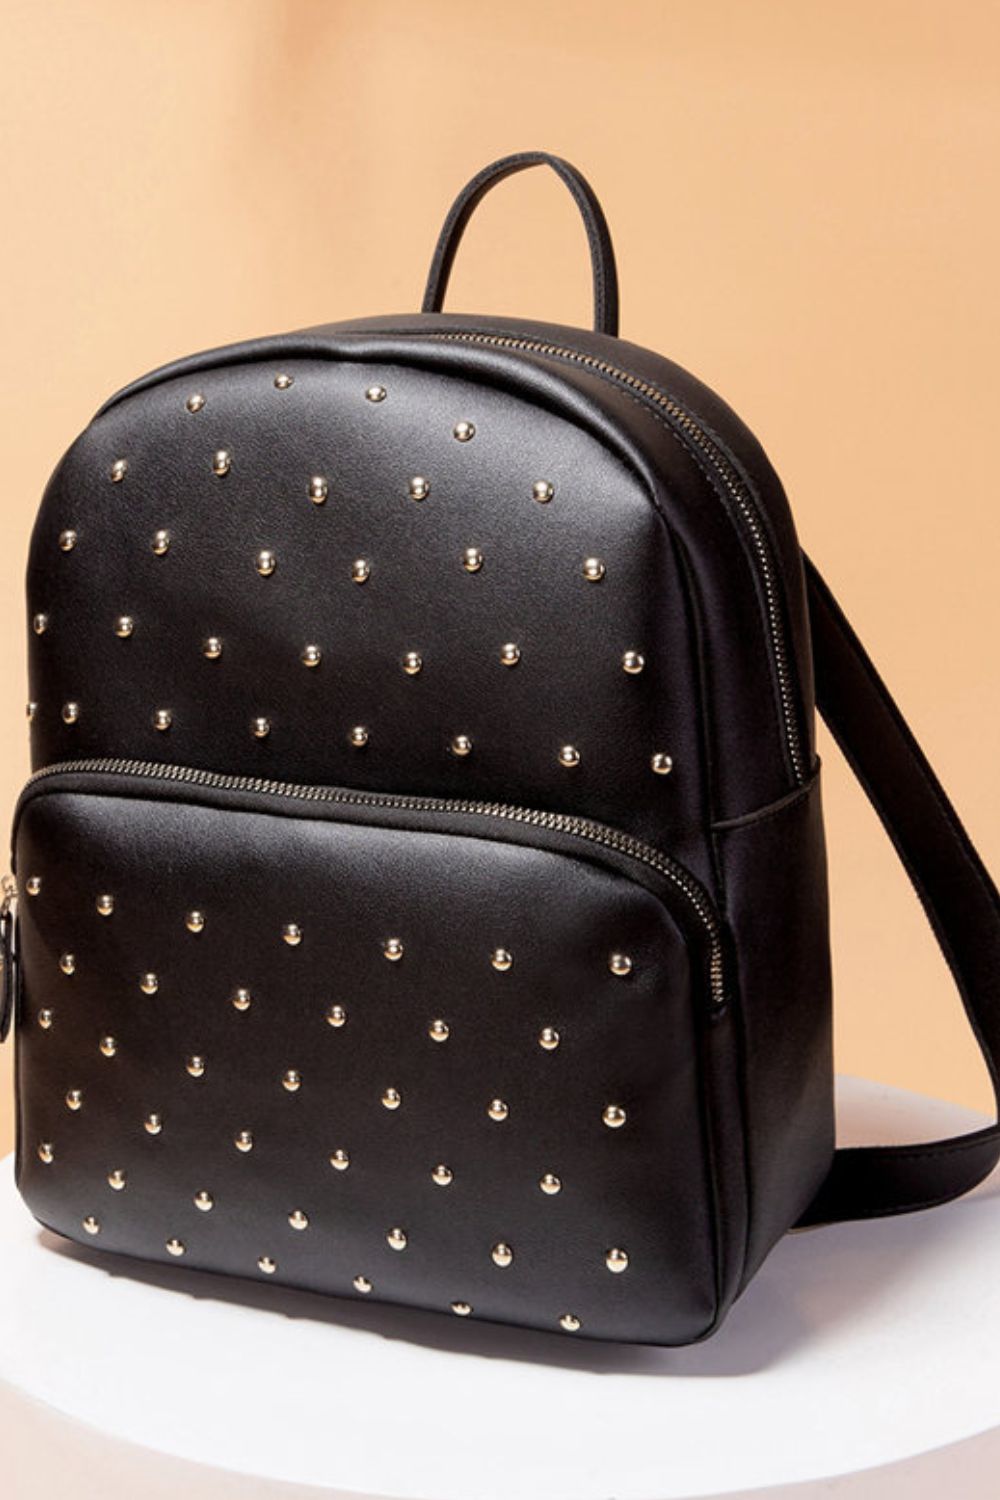 Studded PU Leather Backpack - Online Only